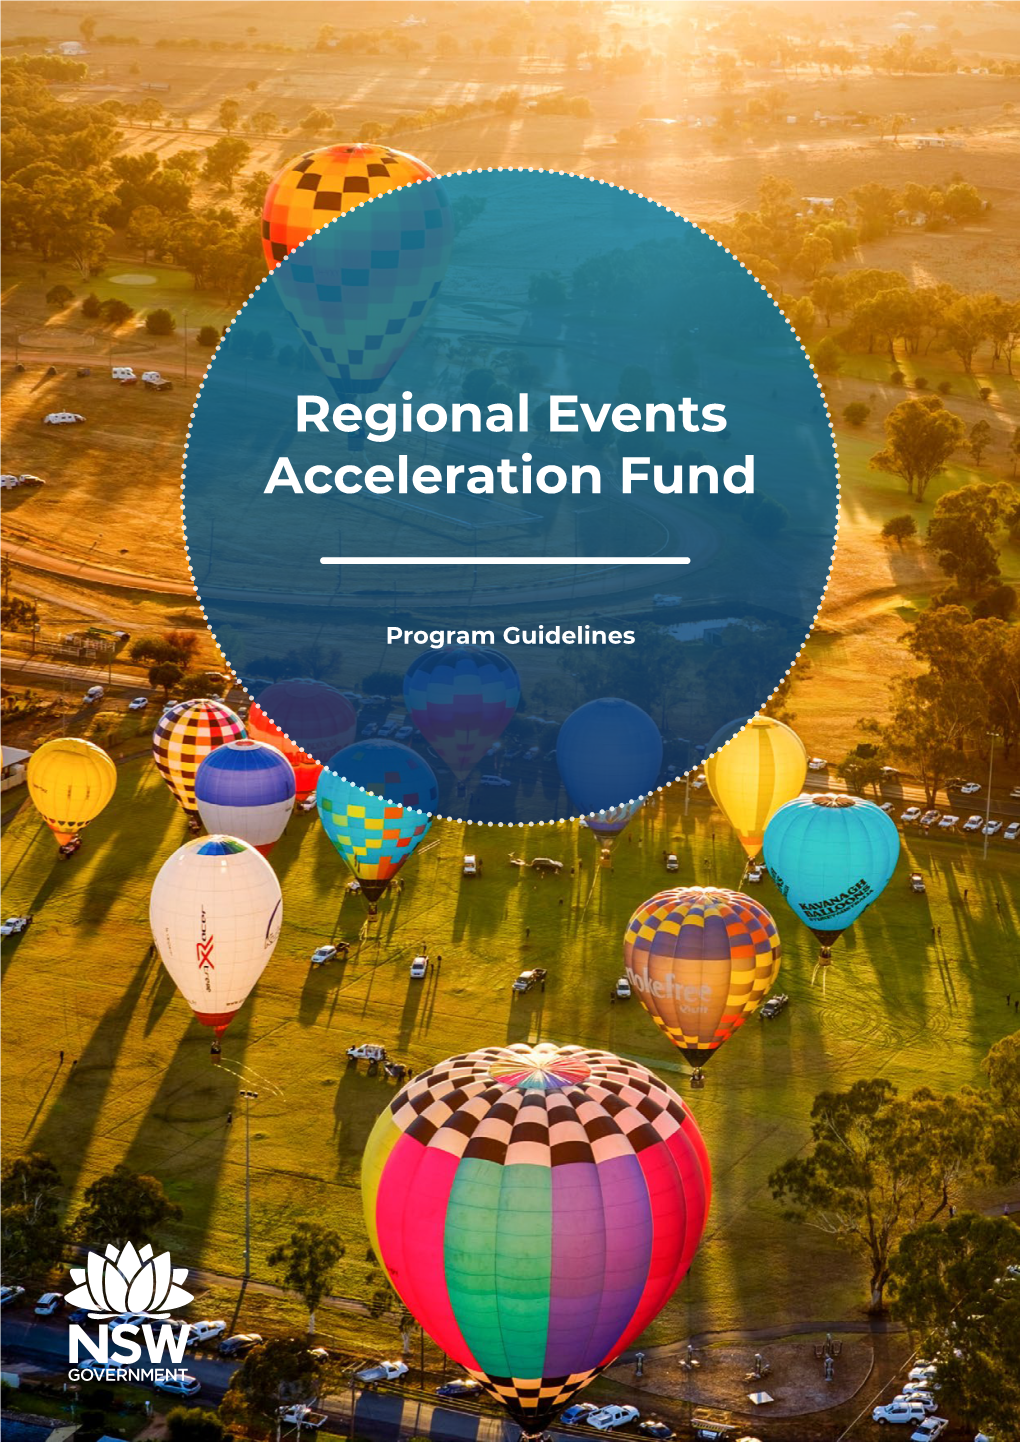 Regional Events Acceleration Fund